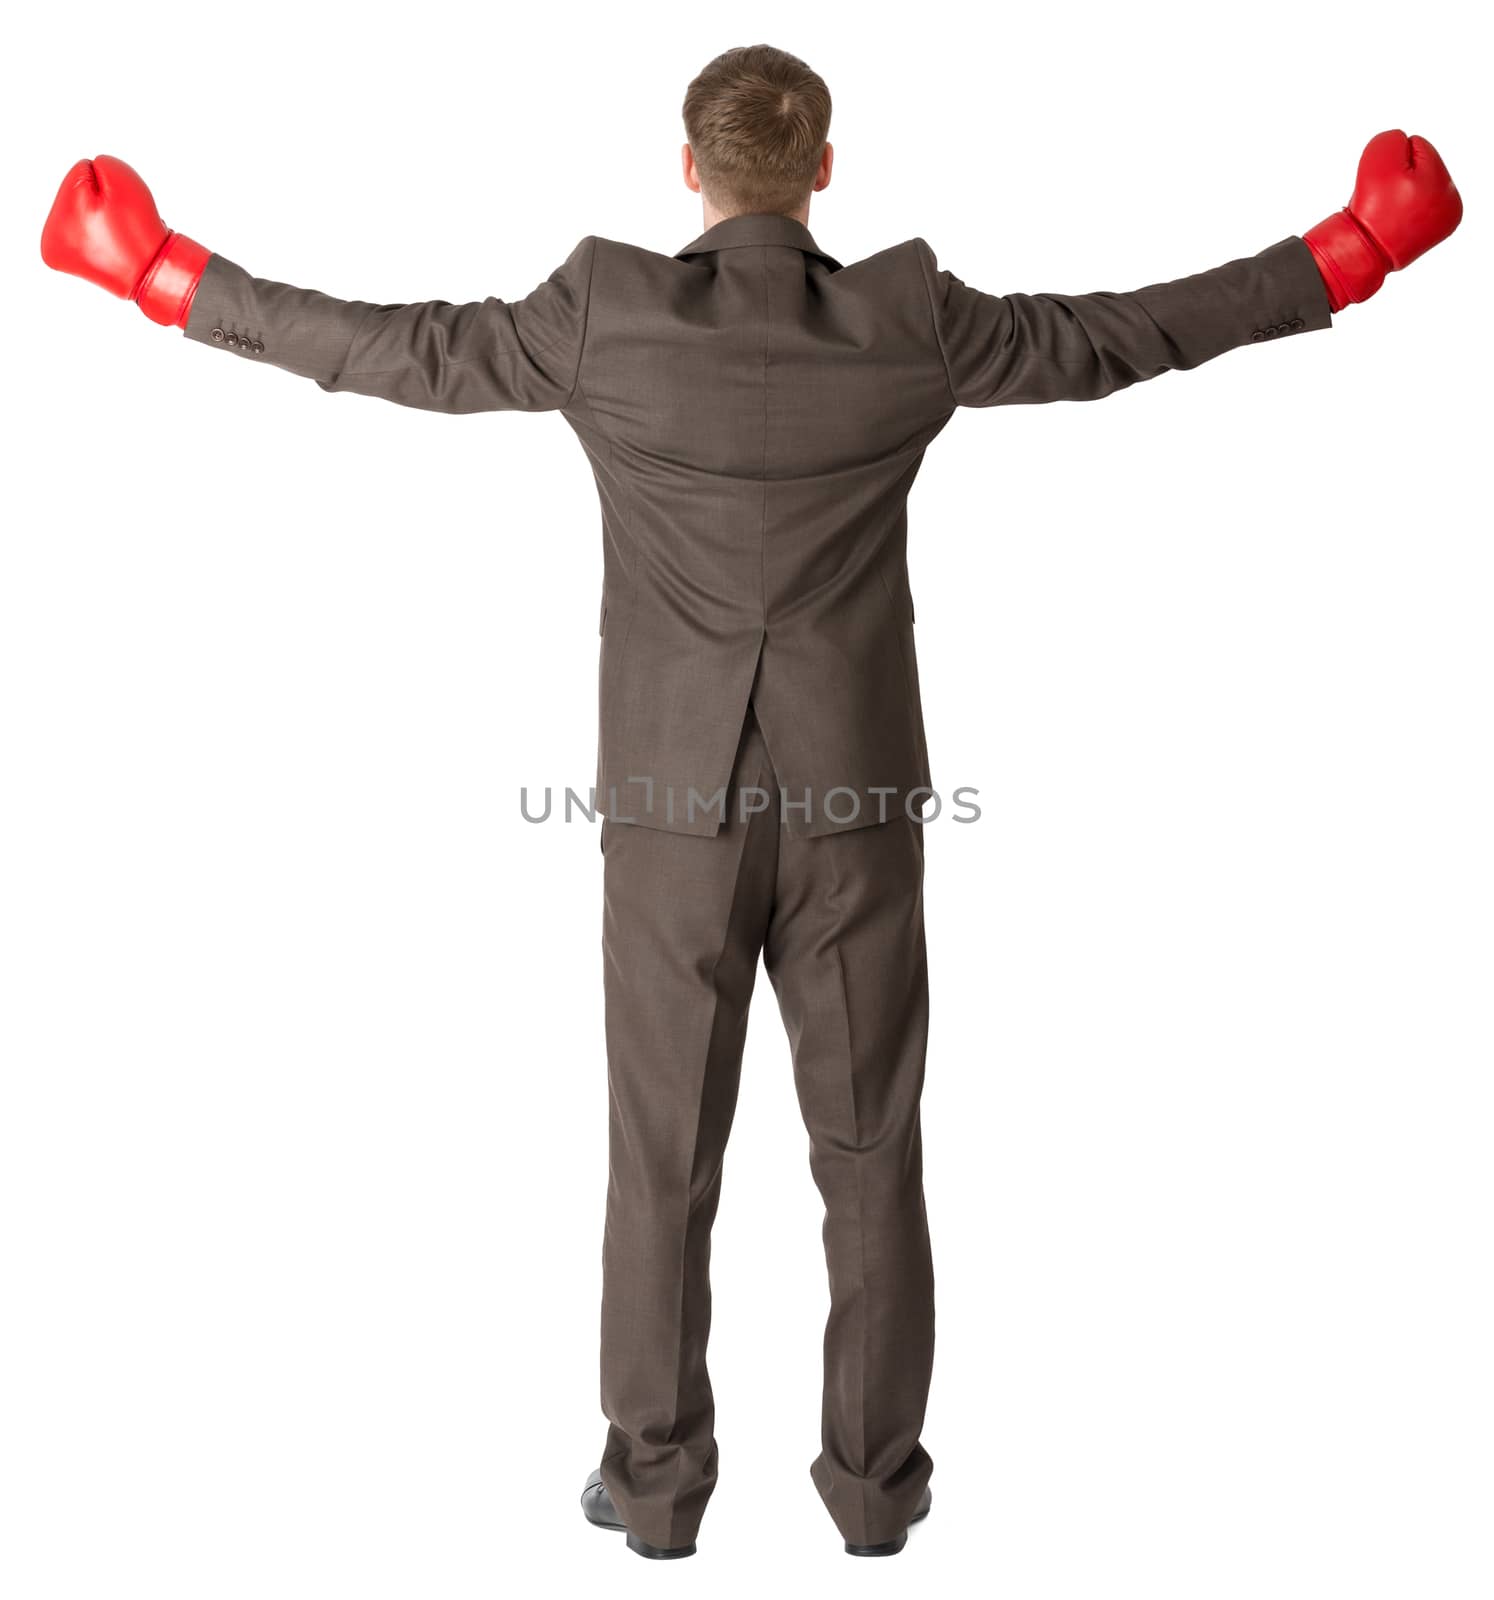 Back view of businessman in red boxing gloves isolated on white background